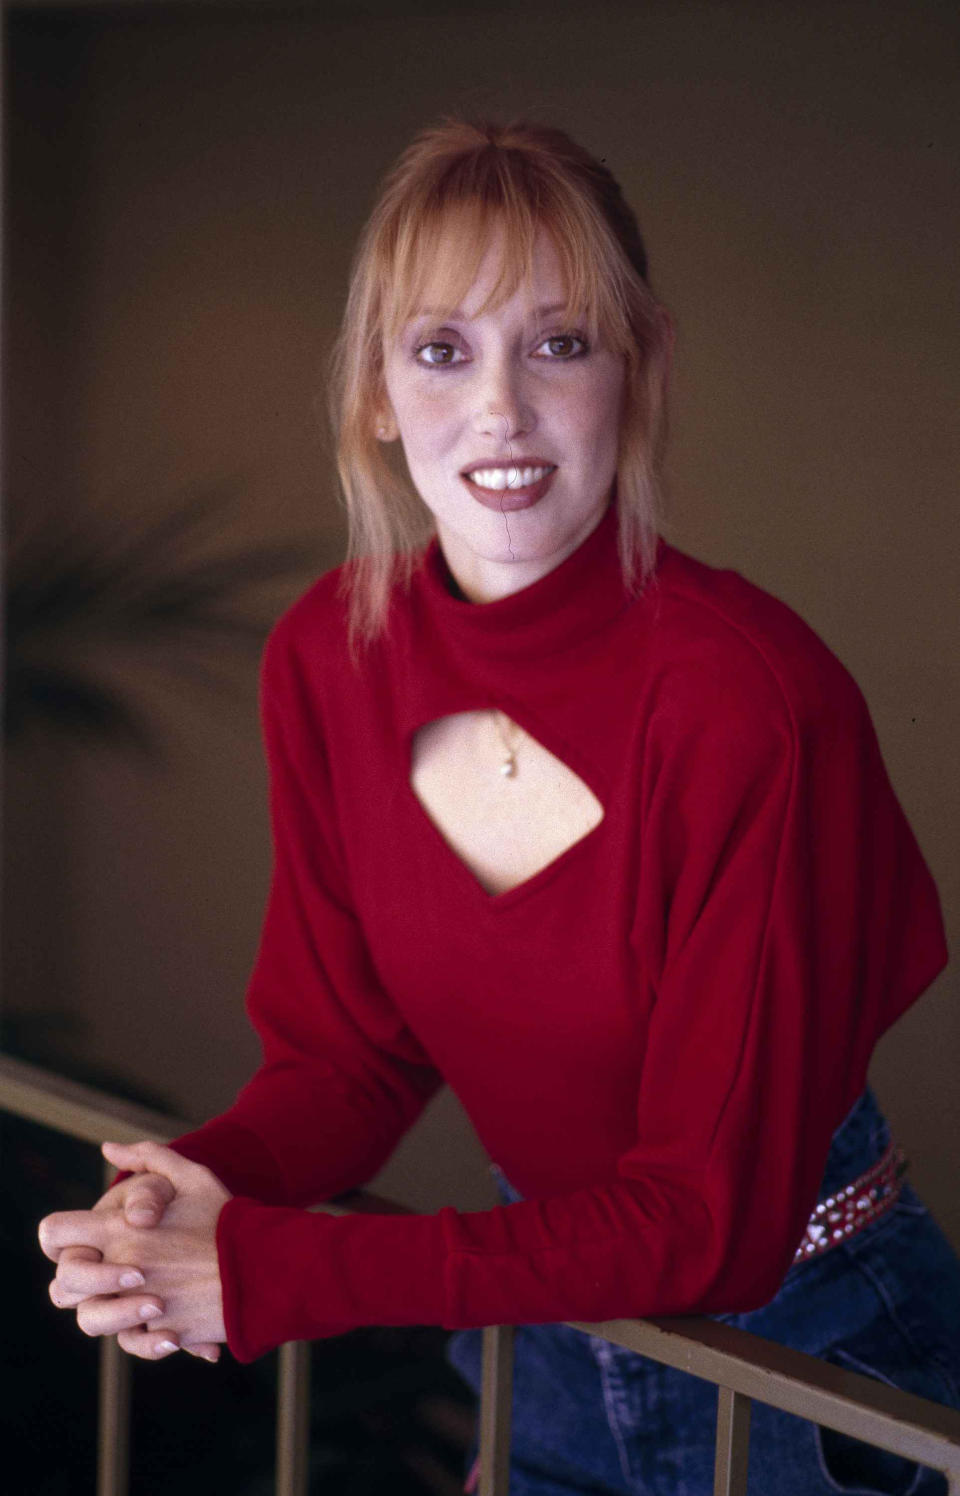 FILE - Shelley Duvall is shown on Oct. 27, 1983, in Los Angeles. Duvall, whose wide-eyed, winsome presence was a mainstay in the films of Robert Altman and who co-starred in Stanley Kubrick's “The Shining,” has died. She was 75. (AP Photo/Doug Pizac, File)